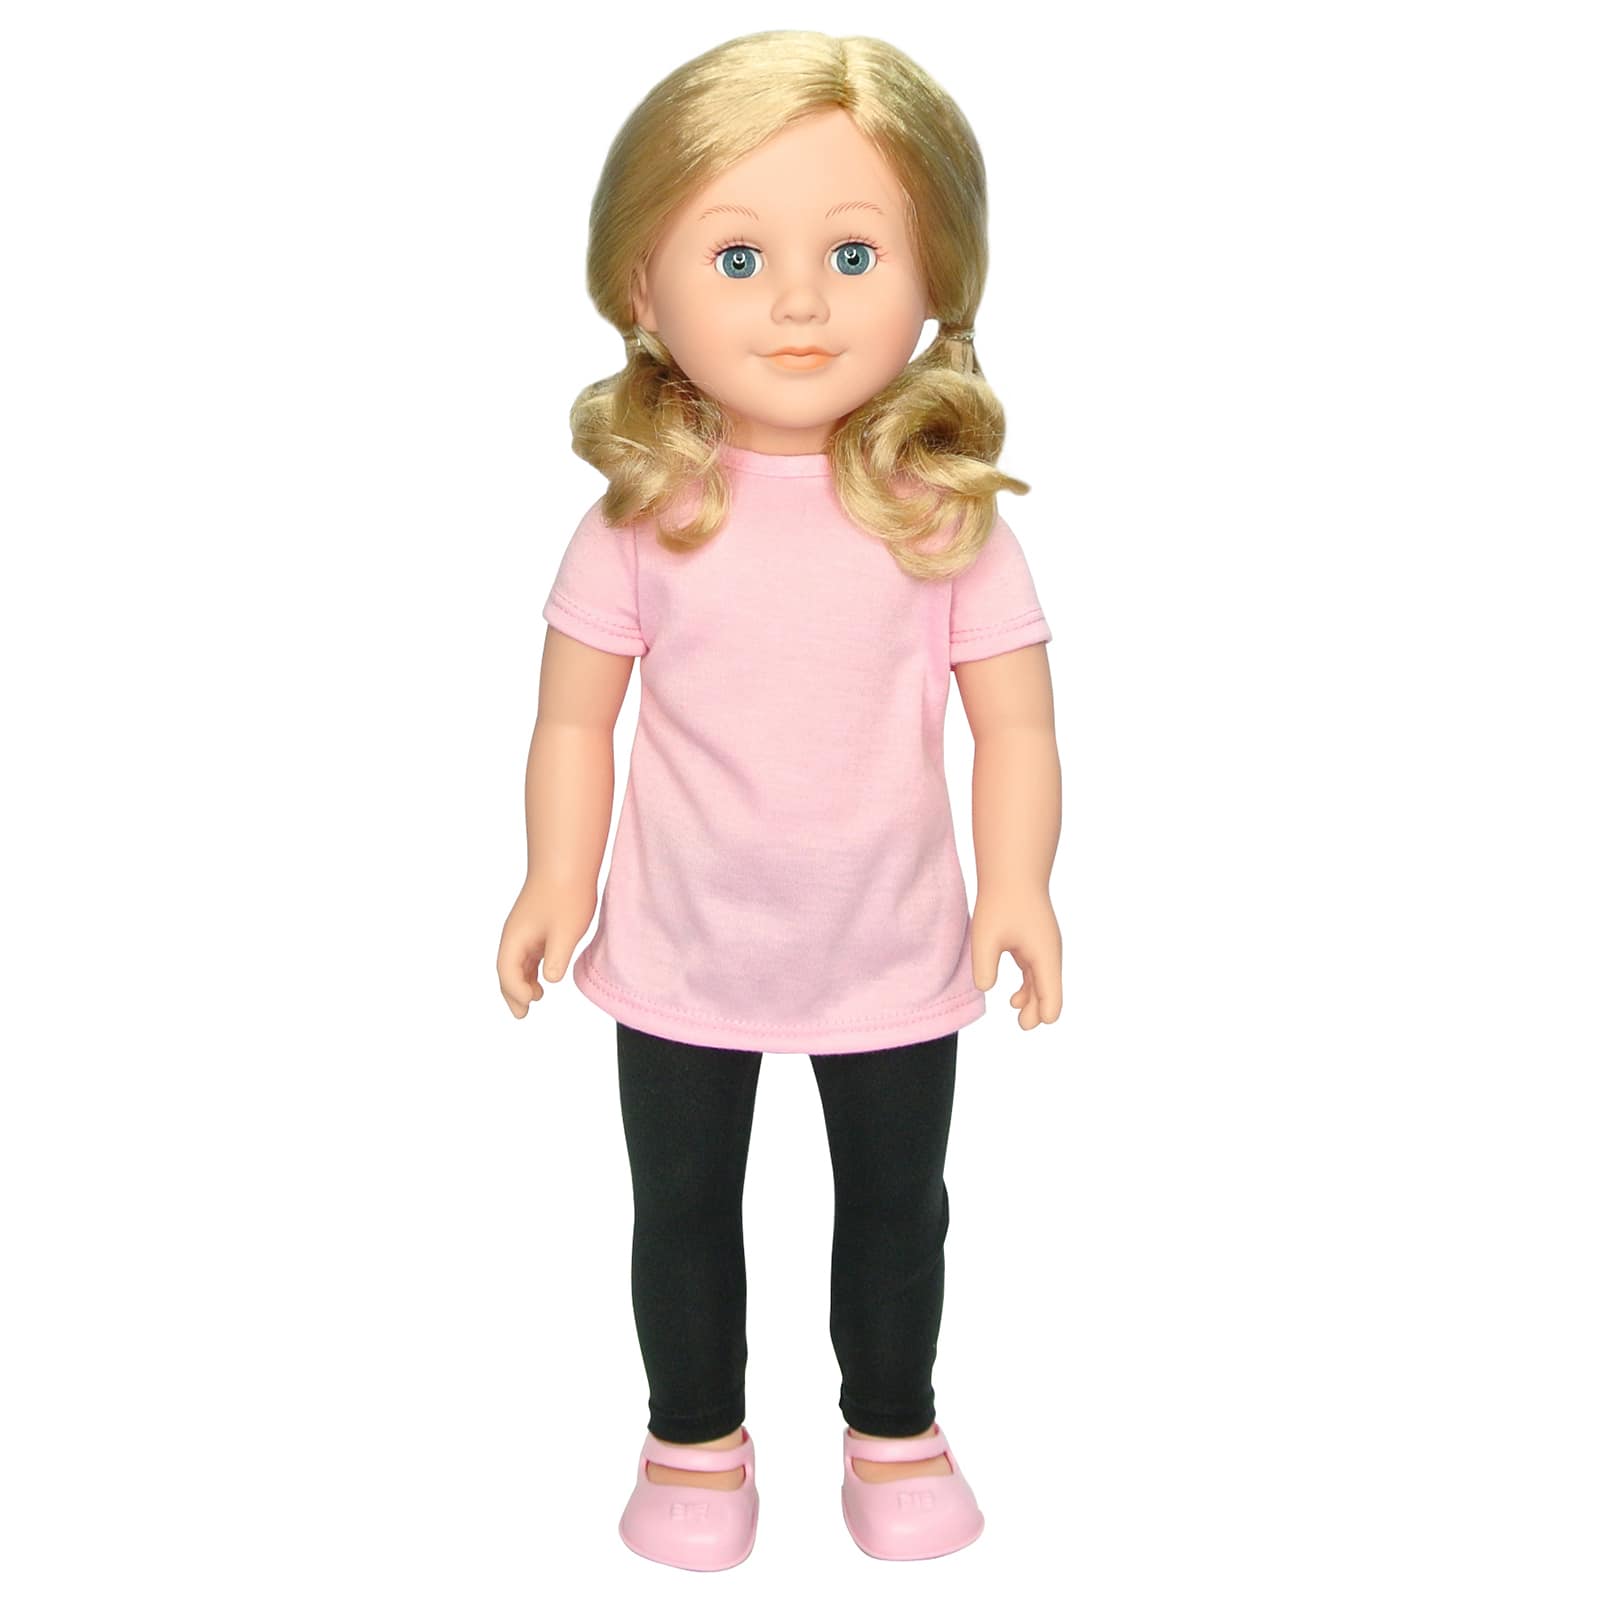 Modern Girls Madeline Doll by Creatology™